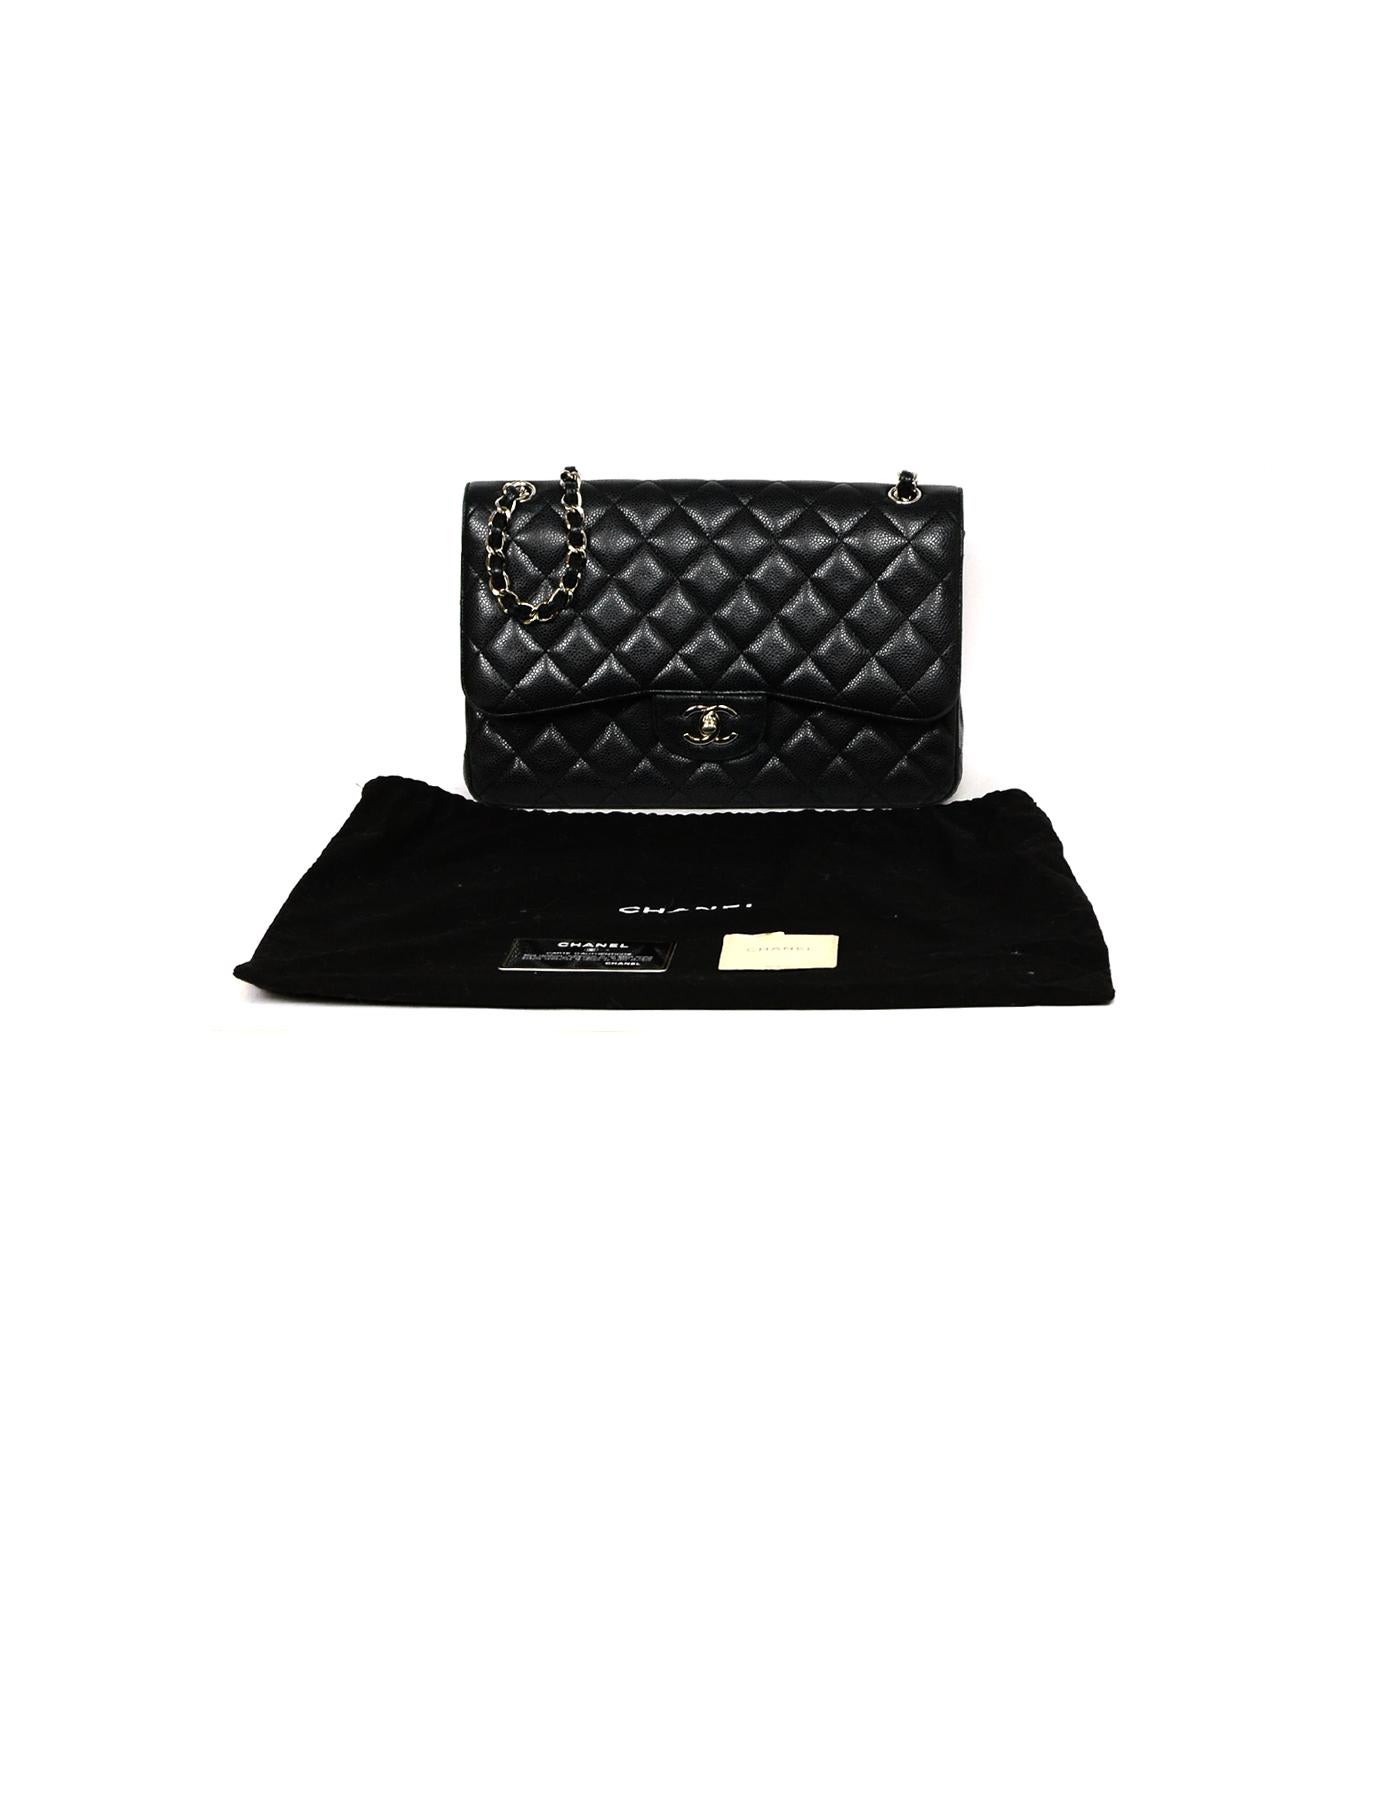 Chanel Black Caviar Leather Quilted Double Flap Jumbo Bag 8